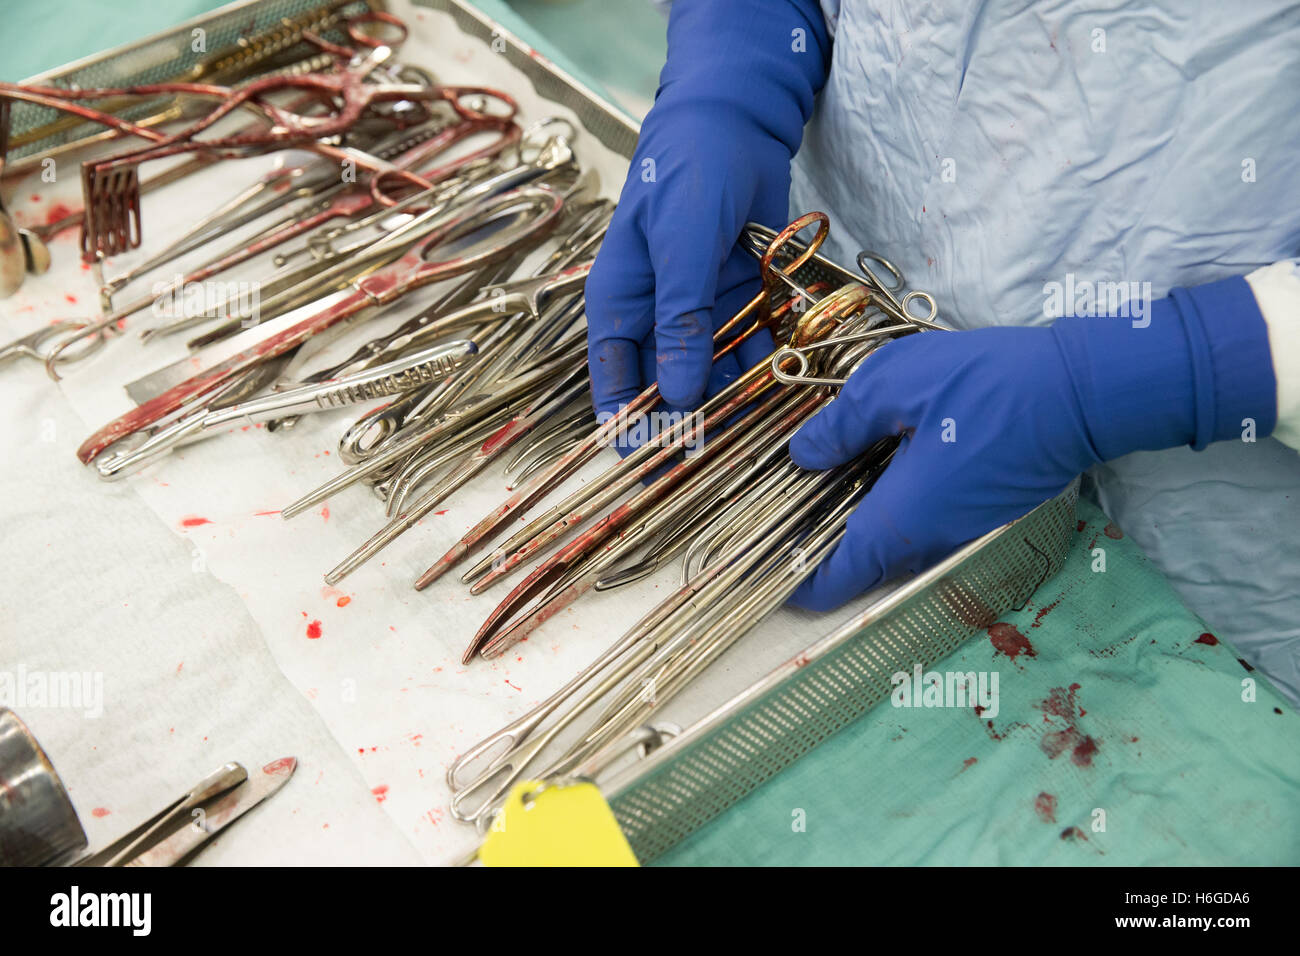 Technician's hand holds surgical instruments with blood-clamps,scalpels and scissors laid out in a tray in the operating theatre Stock Photo